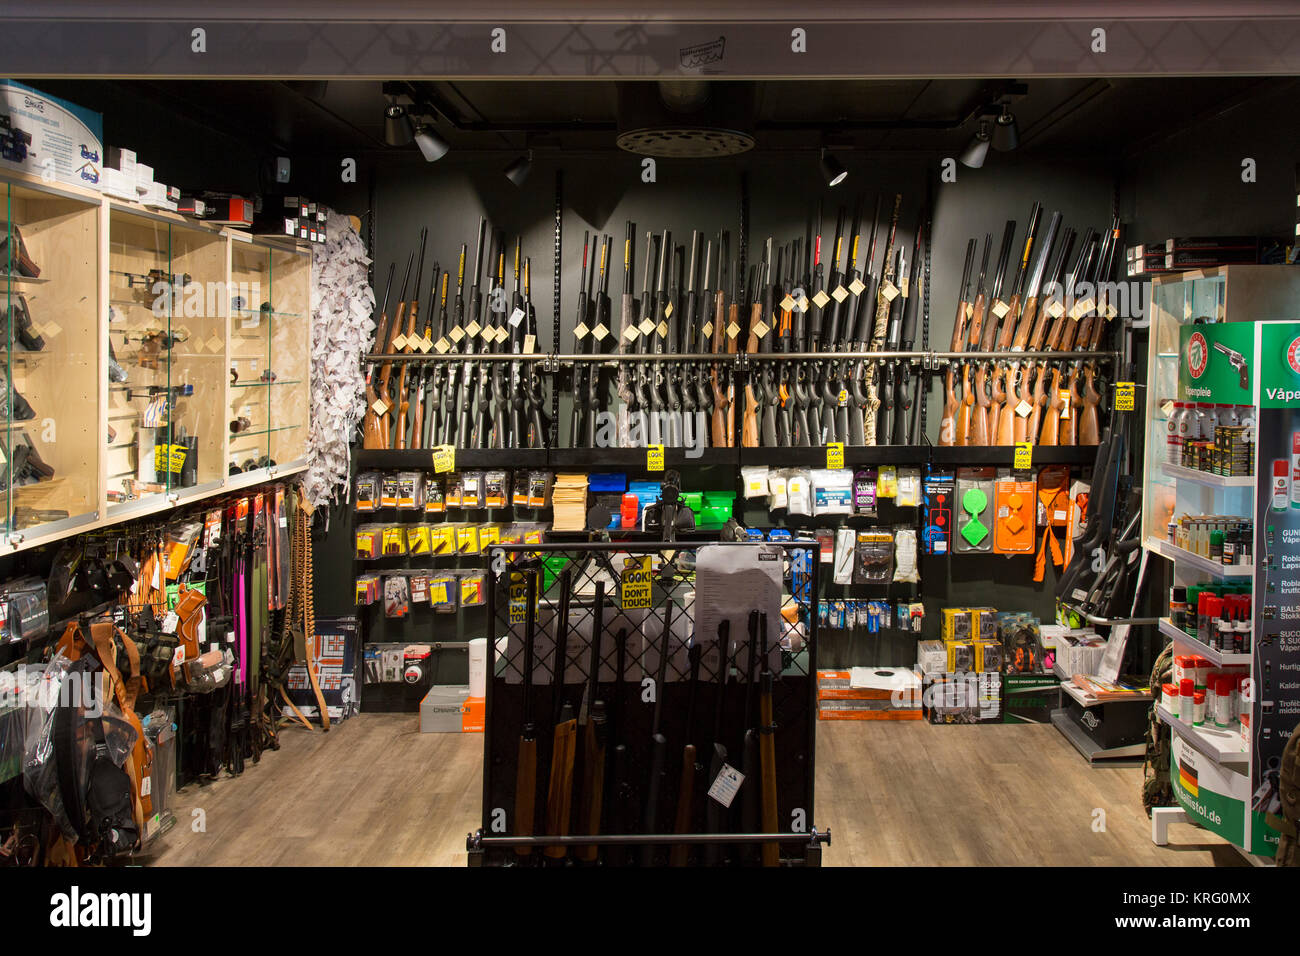 Interior of gunstore selling rifles, handguns and other firearms at Longyearbyen, Svalbard / Spitsbergen, Norway Stock Photo